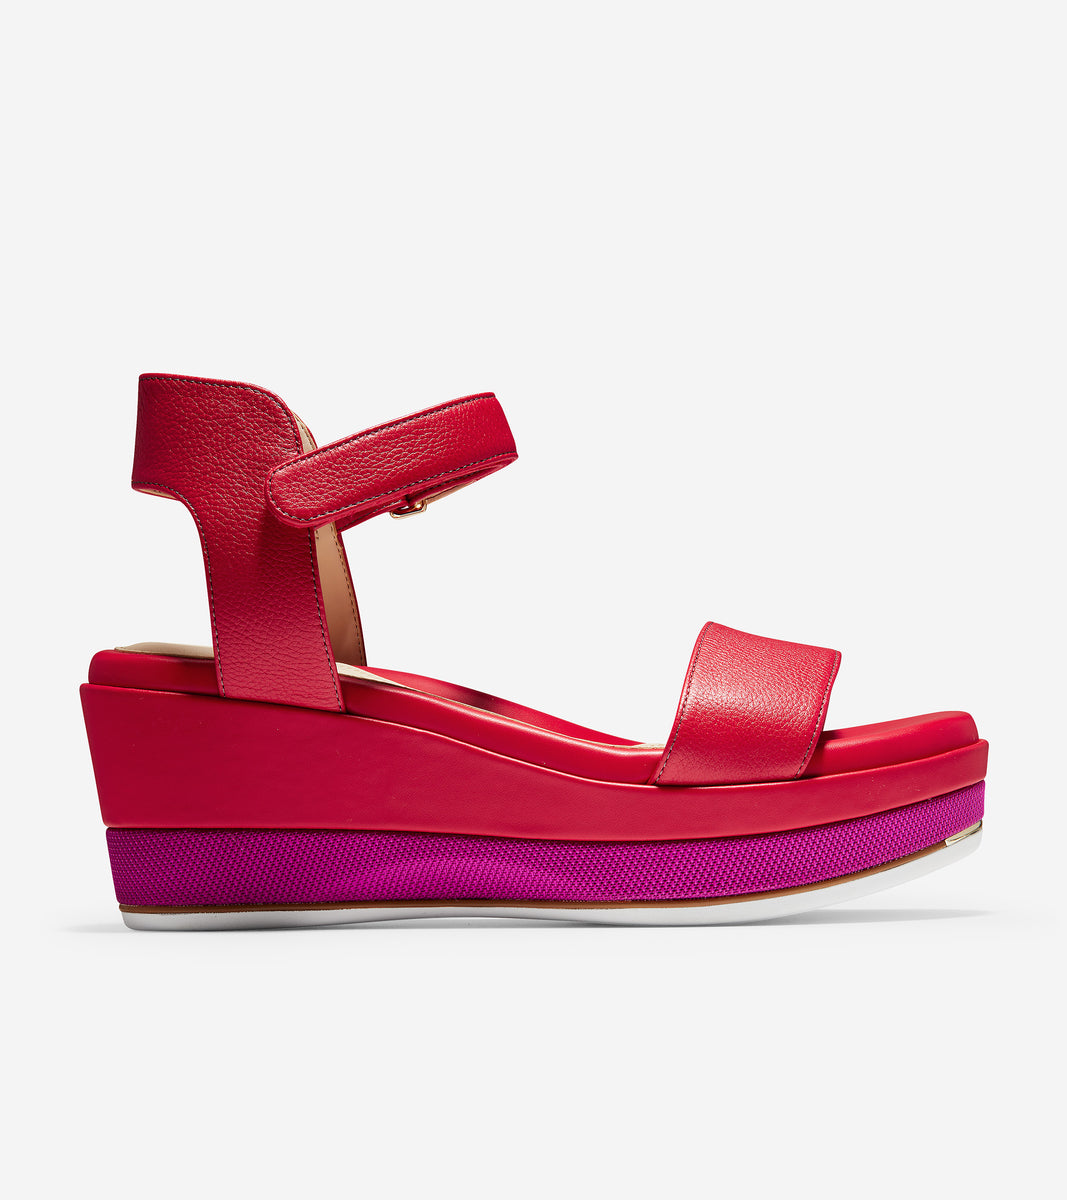 ColeHaan-Grand Ambition Flatform Sandal-w18224-Tango Red Tumbled Leather